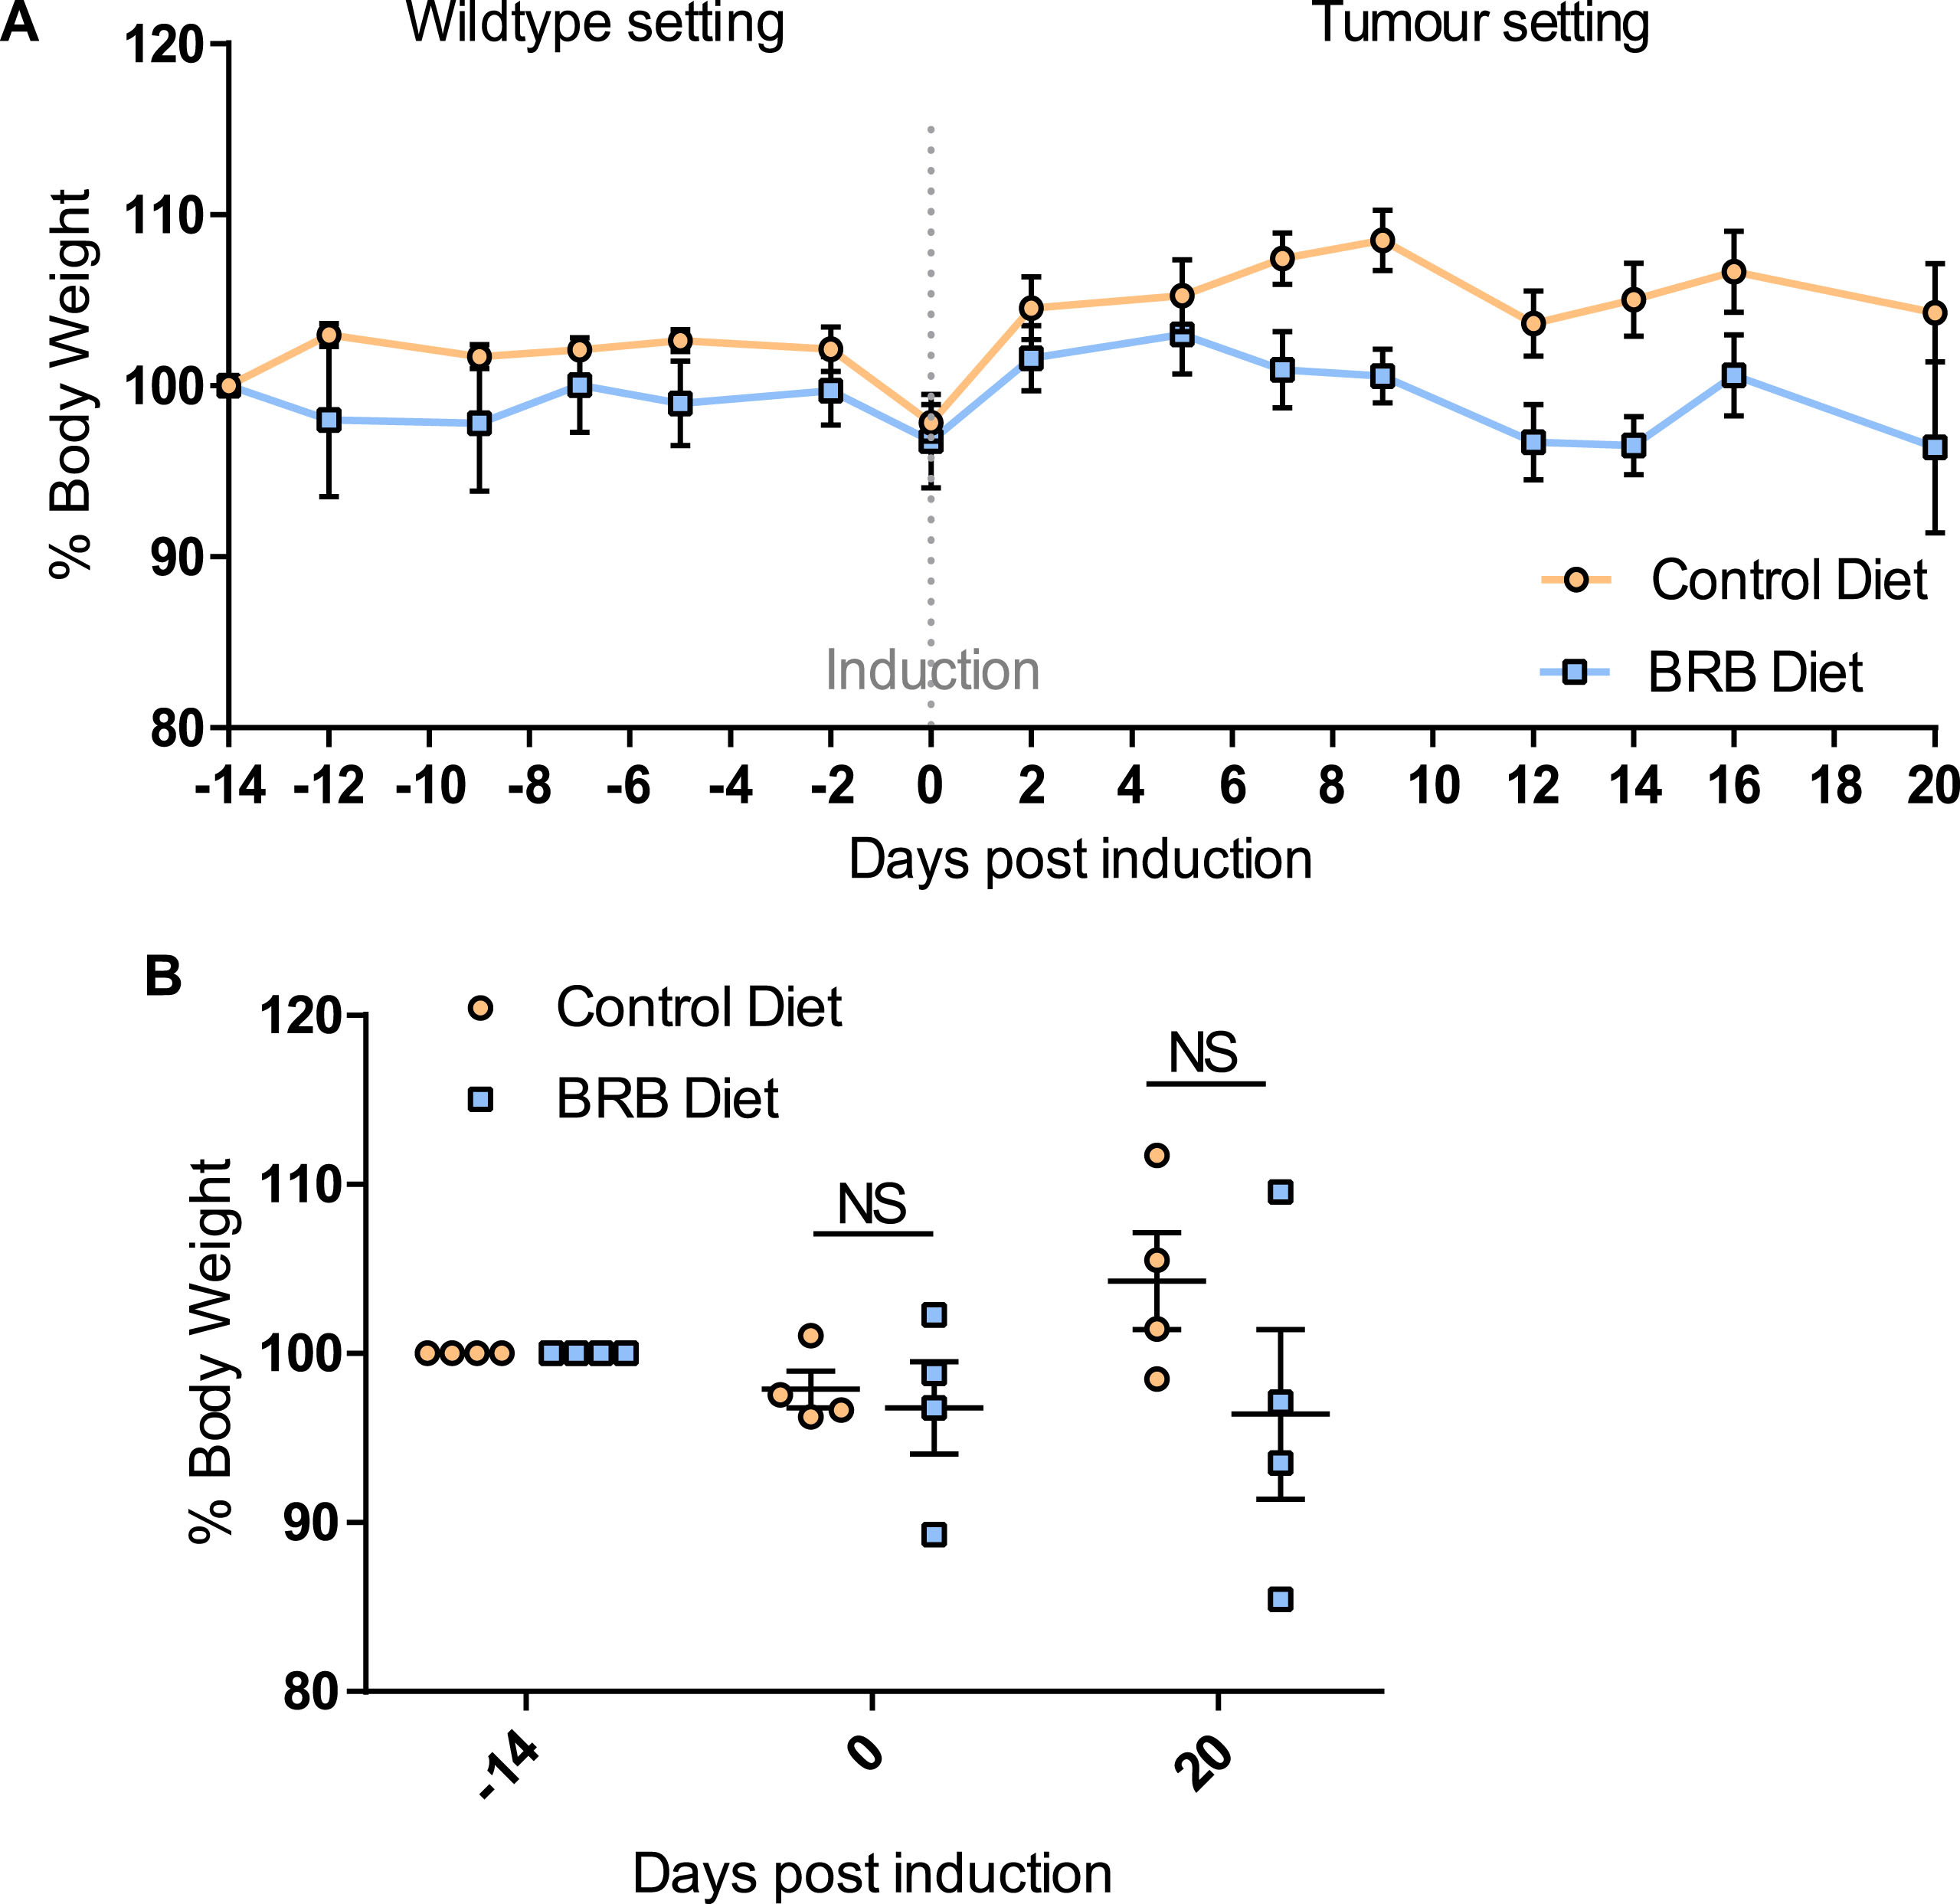 Feeding of 10% BRB diet does not alter mouse body weight over time. (A) A line graph showing % change in body weight over time. At time point – 14 days uninduced Lgr5CreERT2 Apcfl/fl mice (N = 4 per cohort) were administered either control or BRB diet. On day 0 mice were weighed prior to Tamoxifen induction of Cre-mediated Apc loss from the intestinal stem cell compartment. Mice were weighed continually until day 20 post induction where mice were culled and sampled. (B) Scatterplots showing at –14, 0 and 20 days post induction there was no significant difference in % mouse body weight of BRB fed mice compared to control fed mice. N = 4 mice per diet cohort, error bars represent standard error of mean, NS = not significant as determined by a paired t-test.